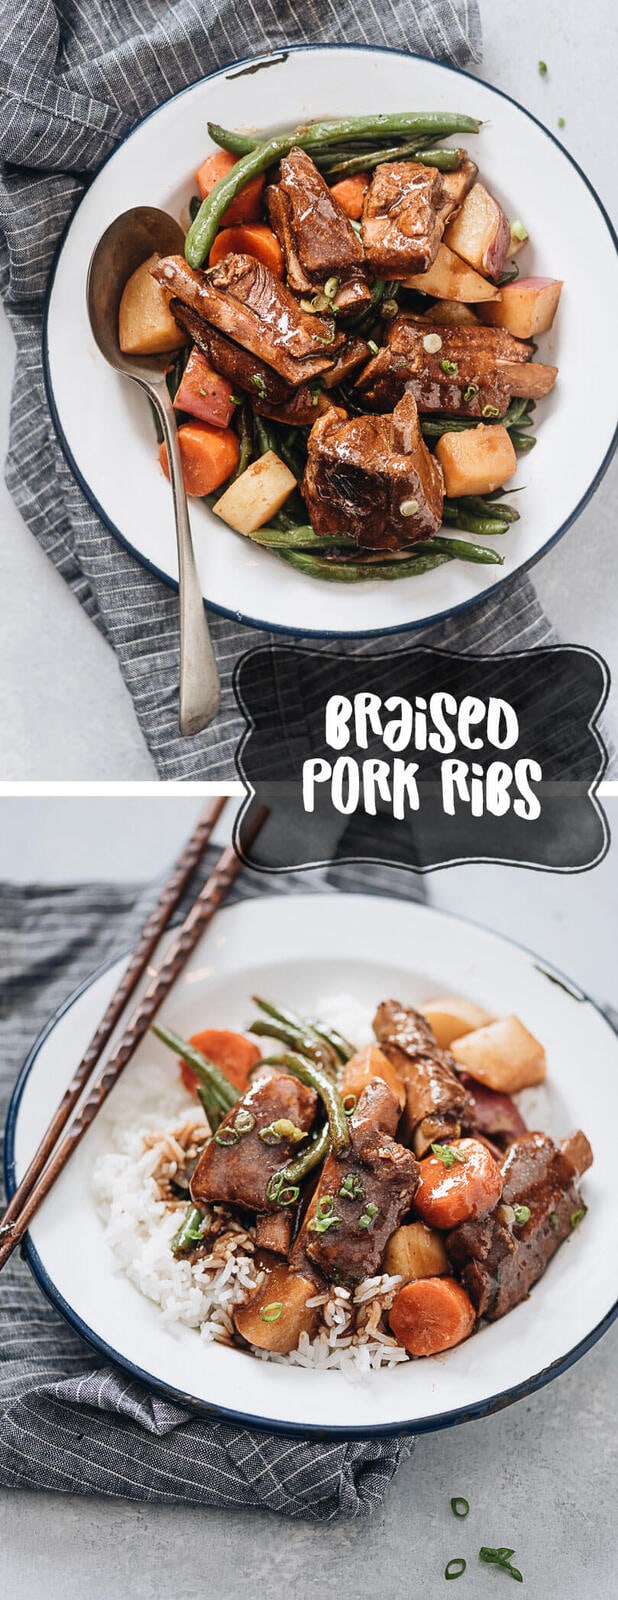 Asian Braised Pork Ribs (红烧排骨) - An easy recipe that promises fall-off-the-bone ribs with a rich, savory taste. Freezer-friendly and perfect for meal prep. {Gluten Free Adaptable}